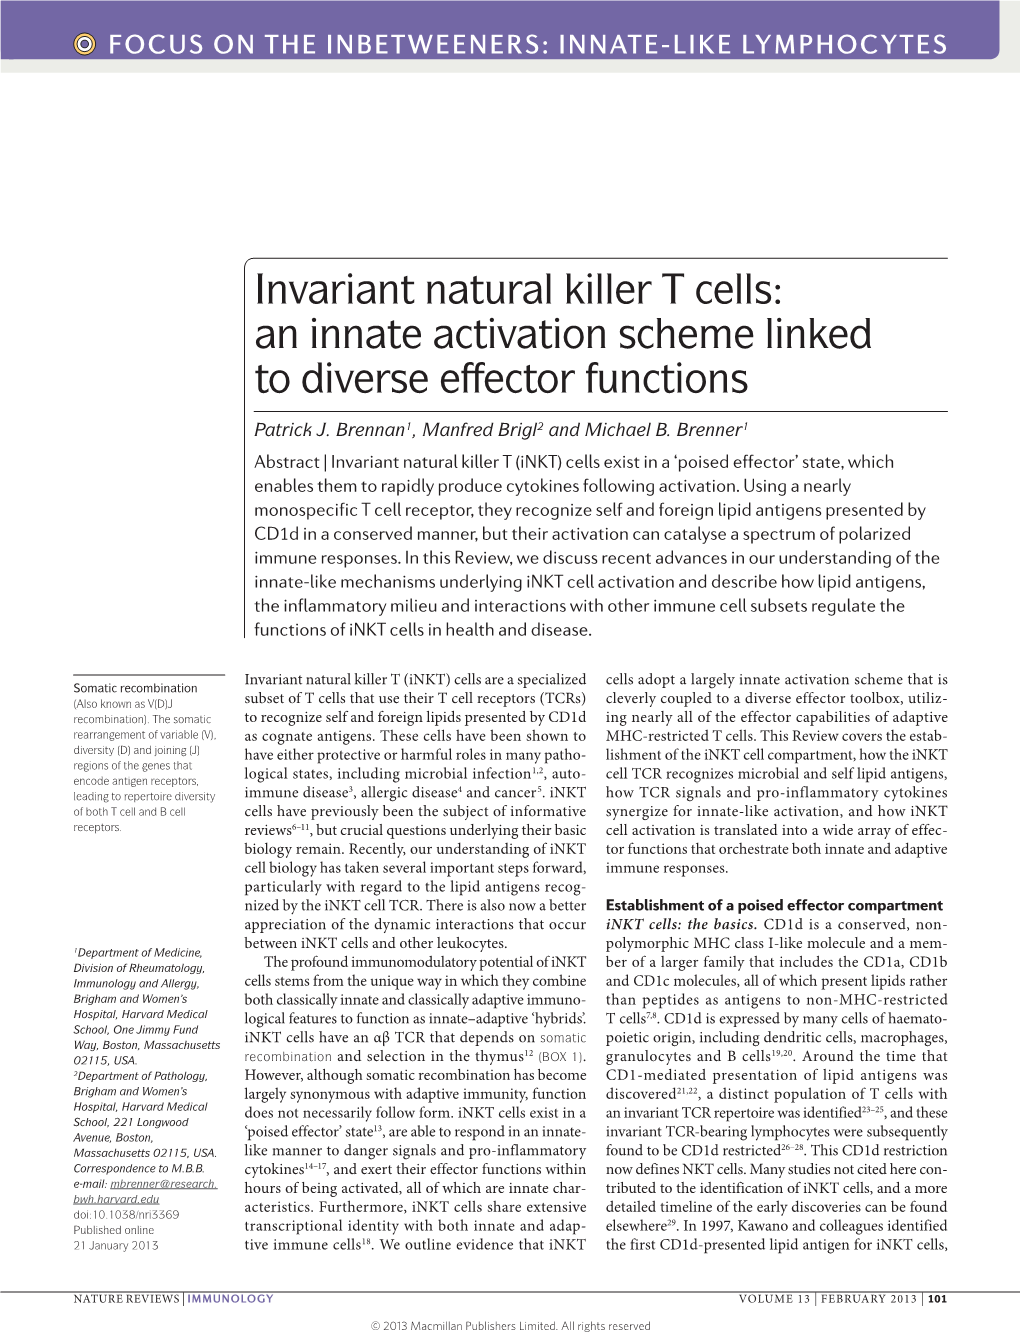 Invariant Natural Killer T Cells: an Innate Activation Scheme Linked to Diverse Effector Functions